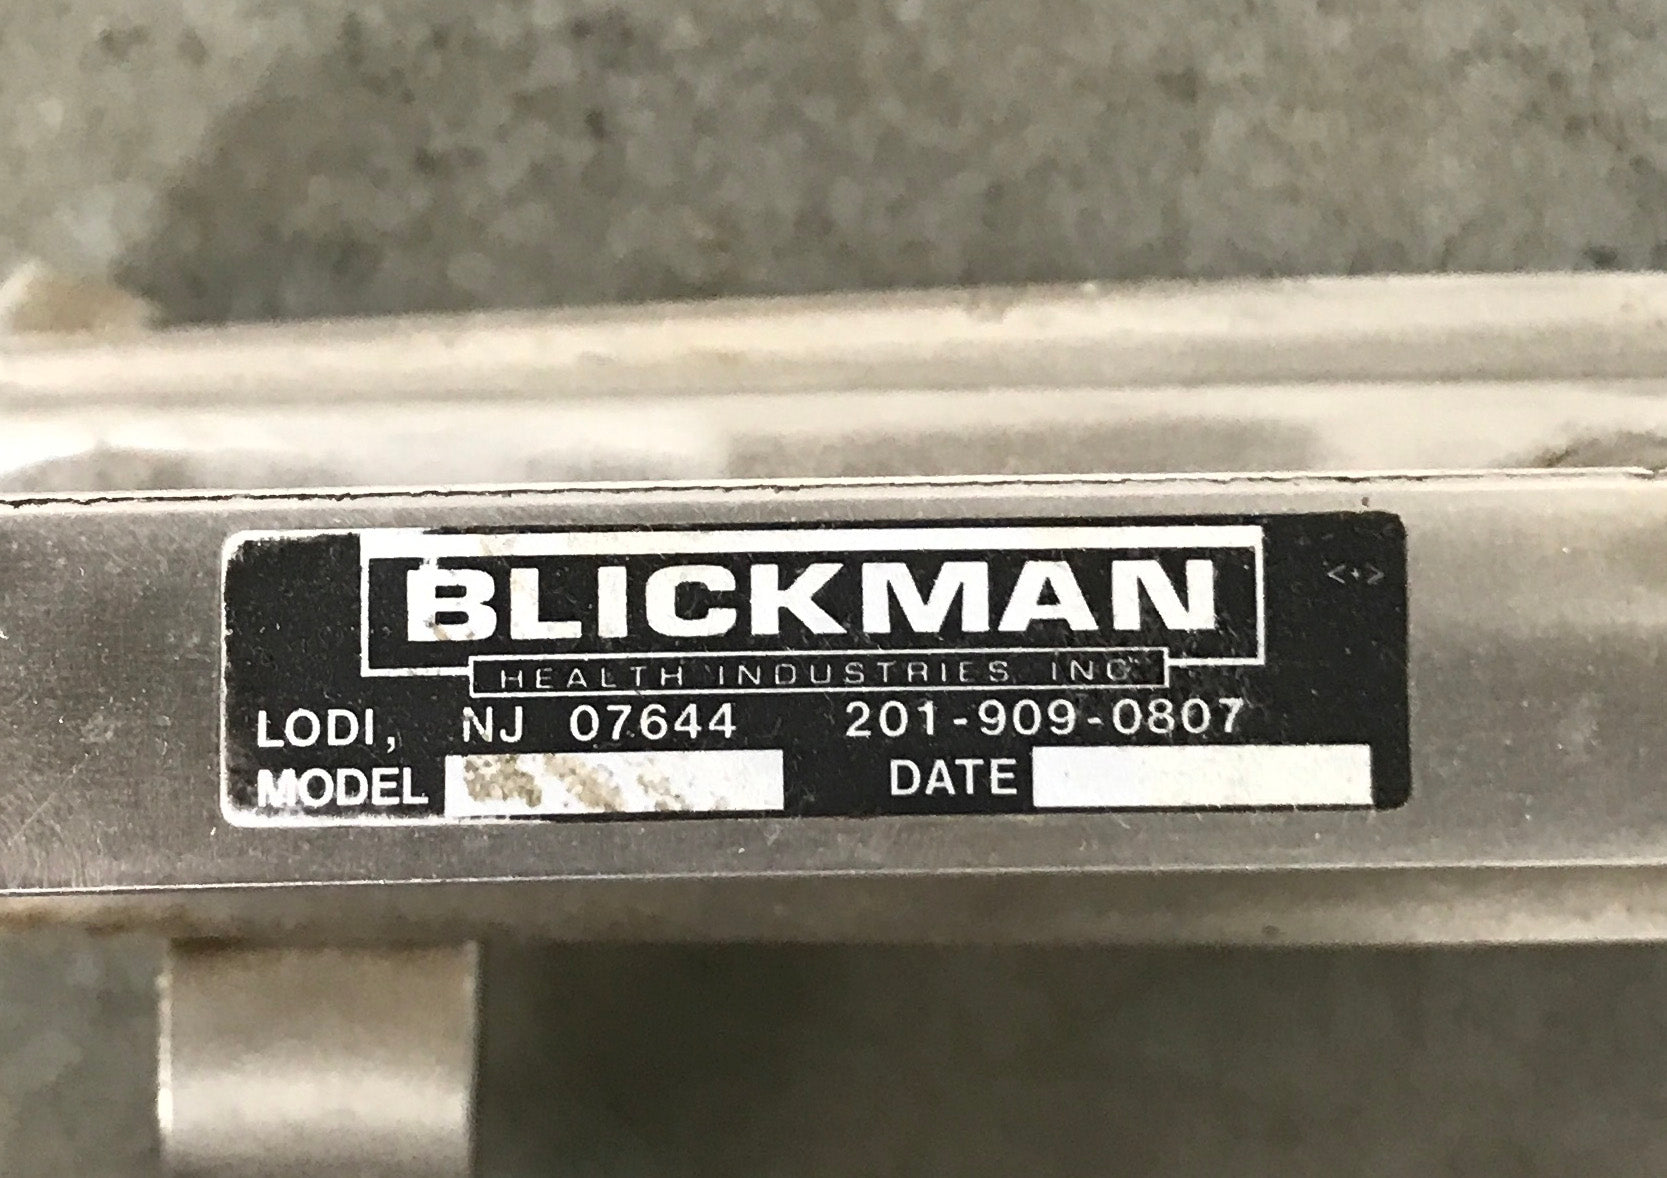 Blickman Stainless Steel Medical Tray